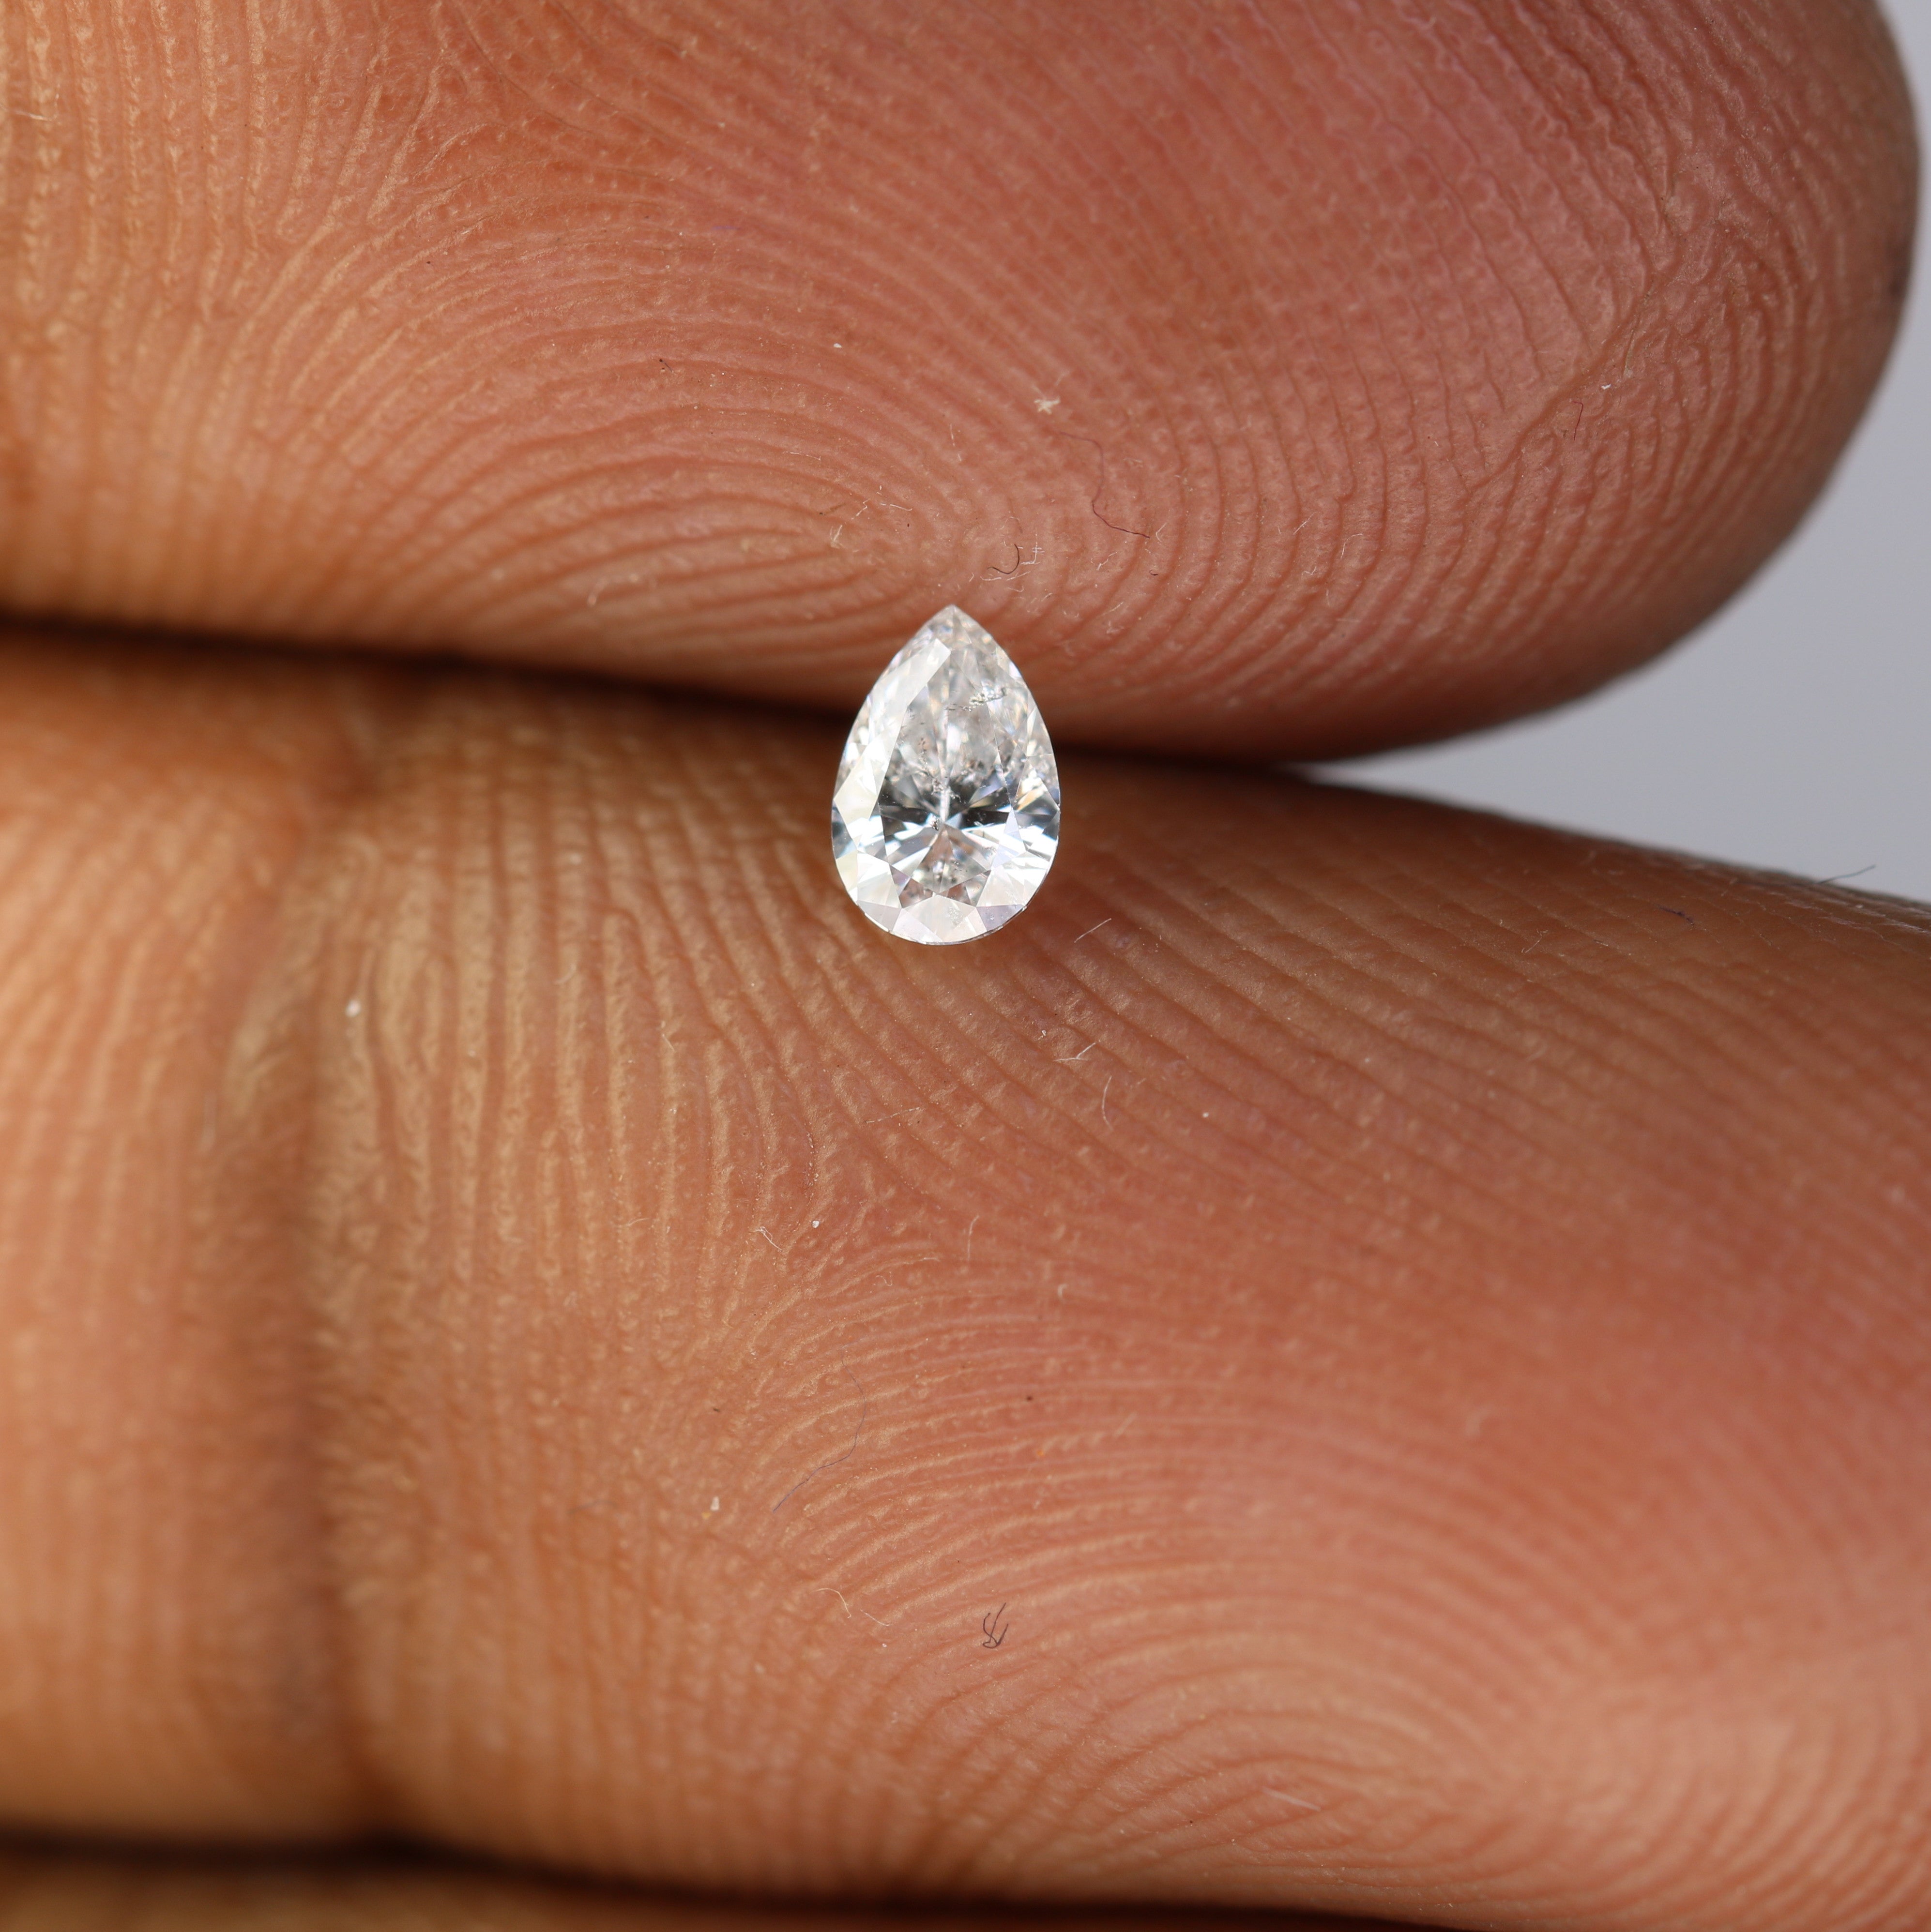 0.17 CT Pear Cut Natural White Diamond For Engagement Ring